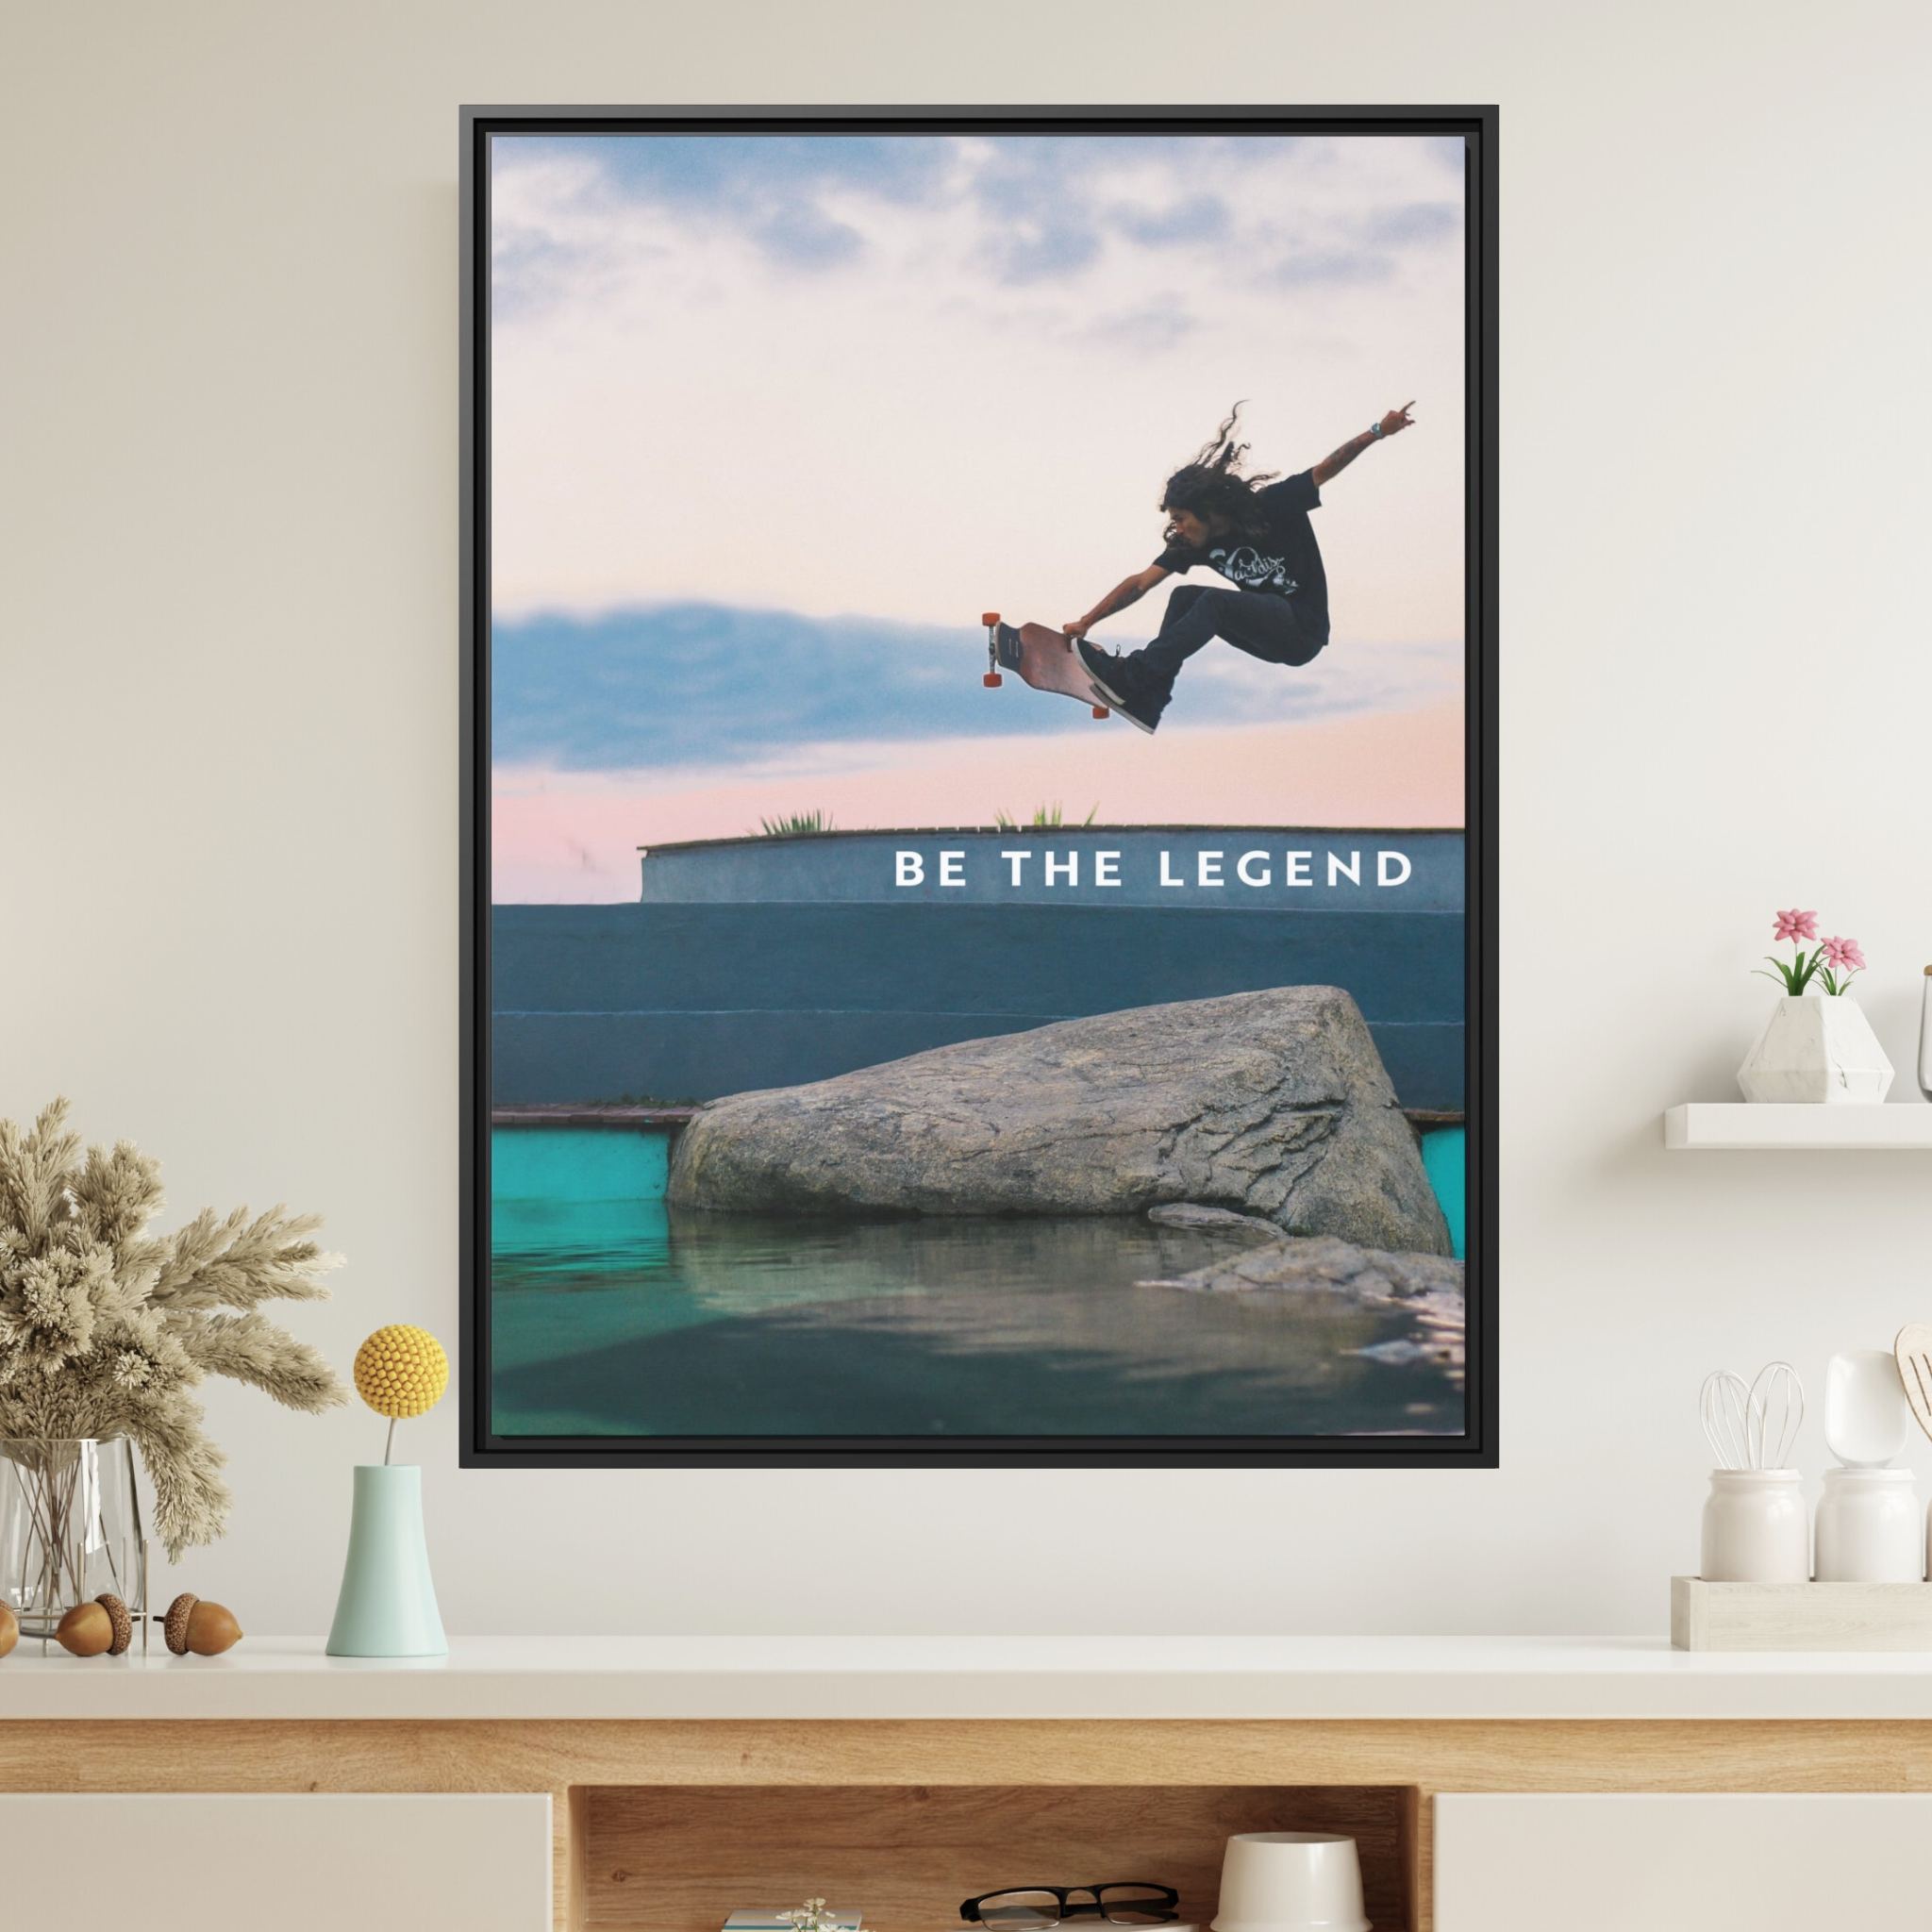 Be The Legend - Rip It - Wall Art additional image 1